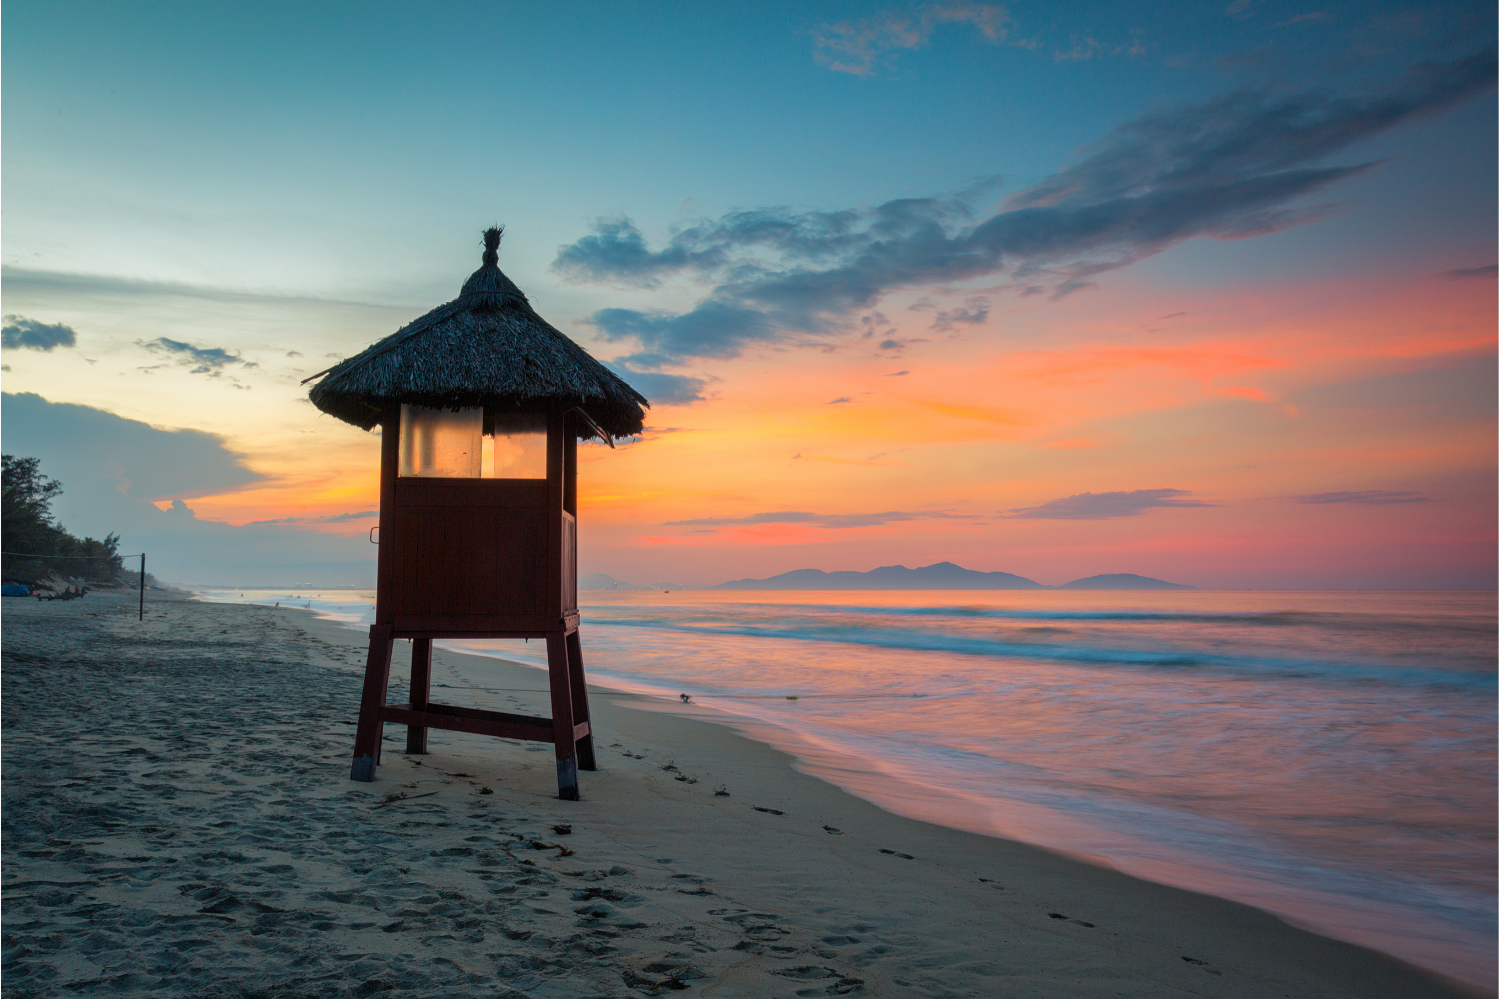 Lifeguard tower on a beach at dusk with pastel skies and gentle lapping waves